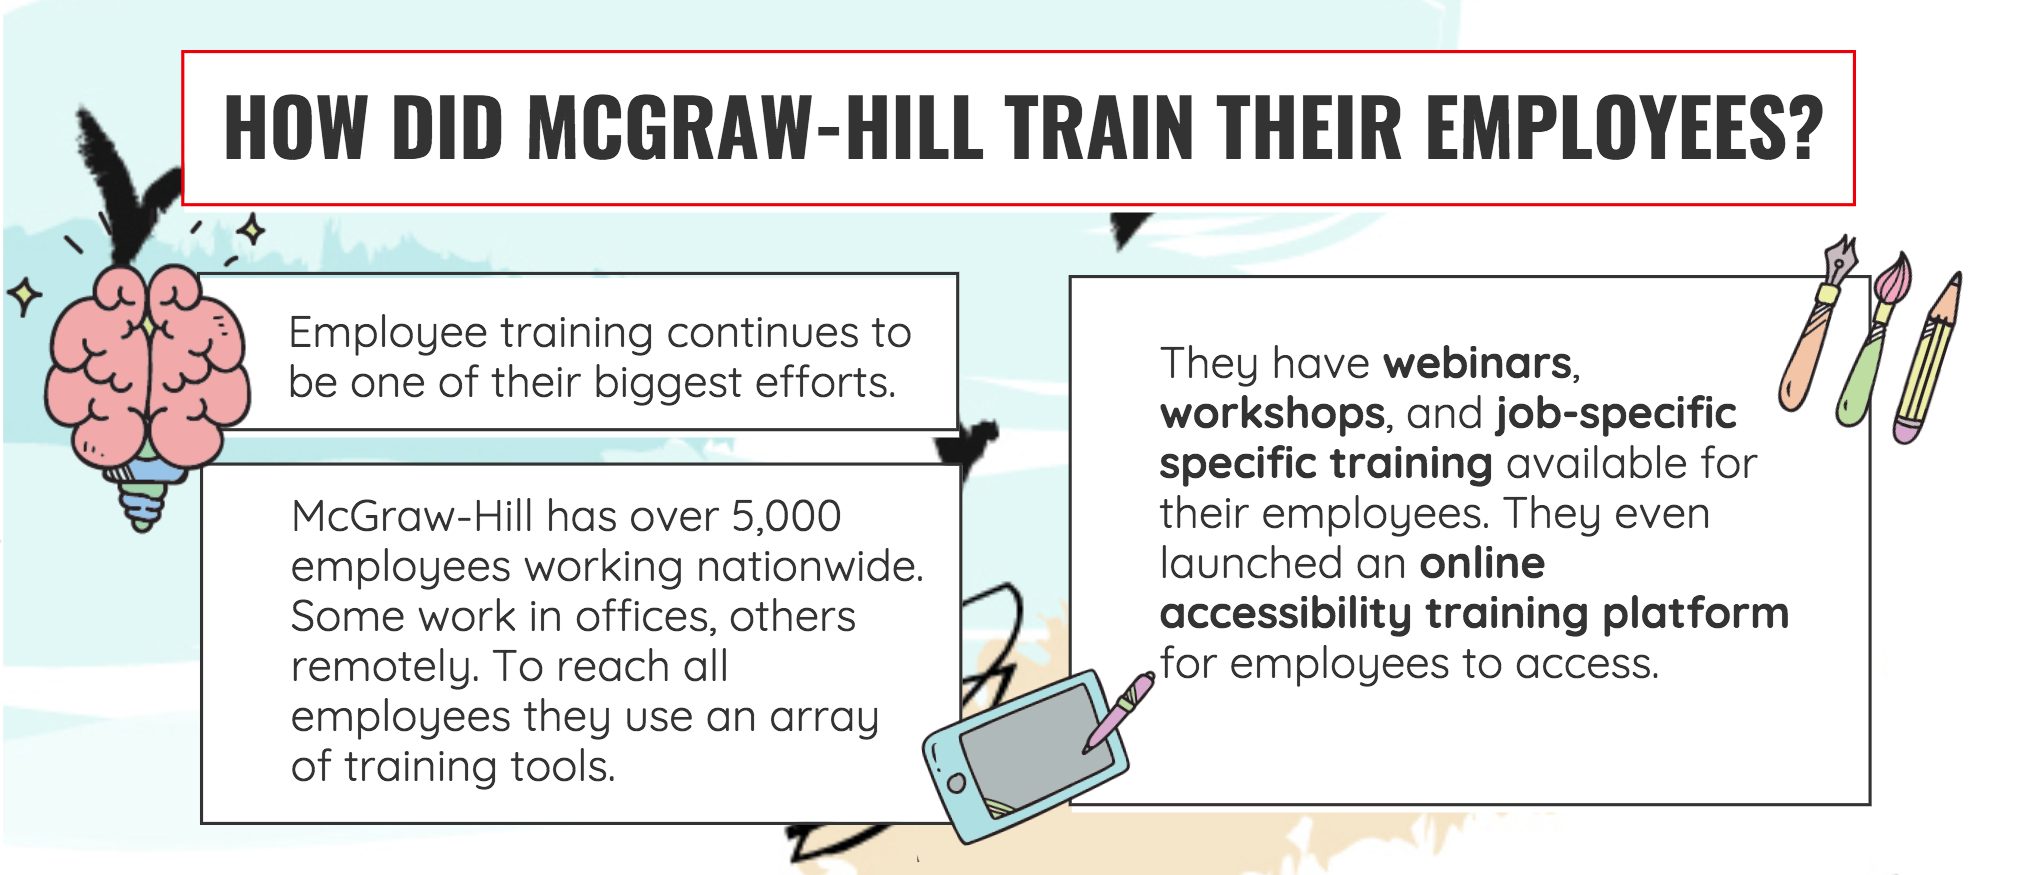 how did mcgraw-hill train their employees? Employee training continues to be one of their biggest efforts. With over 5,000 employees working all over the country, it was important that they had webinars, workshops, and job-specific specific training available for their employees. They even launched an accessibility training platform online for employees to access and begin training.